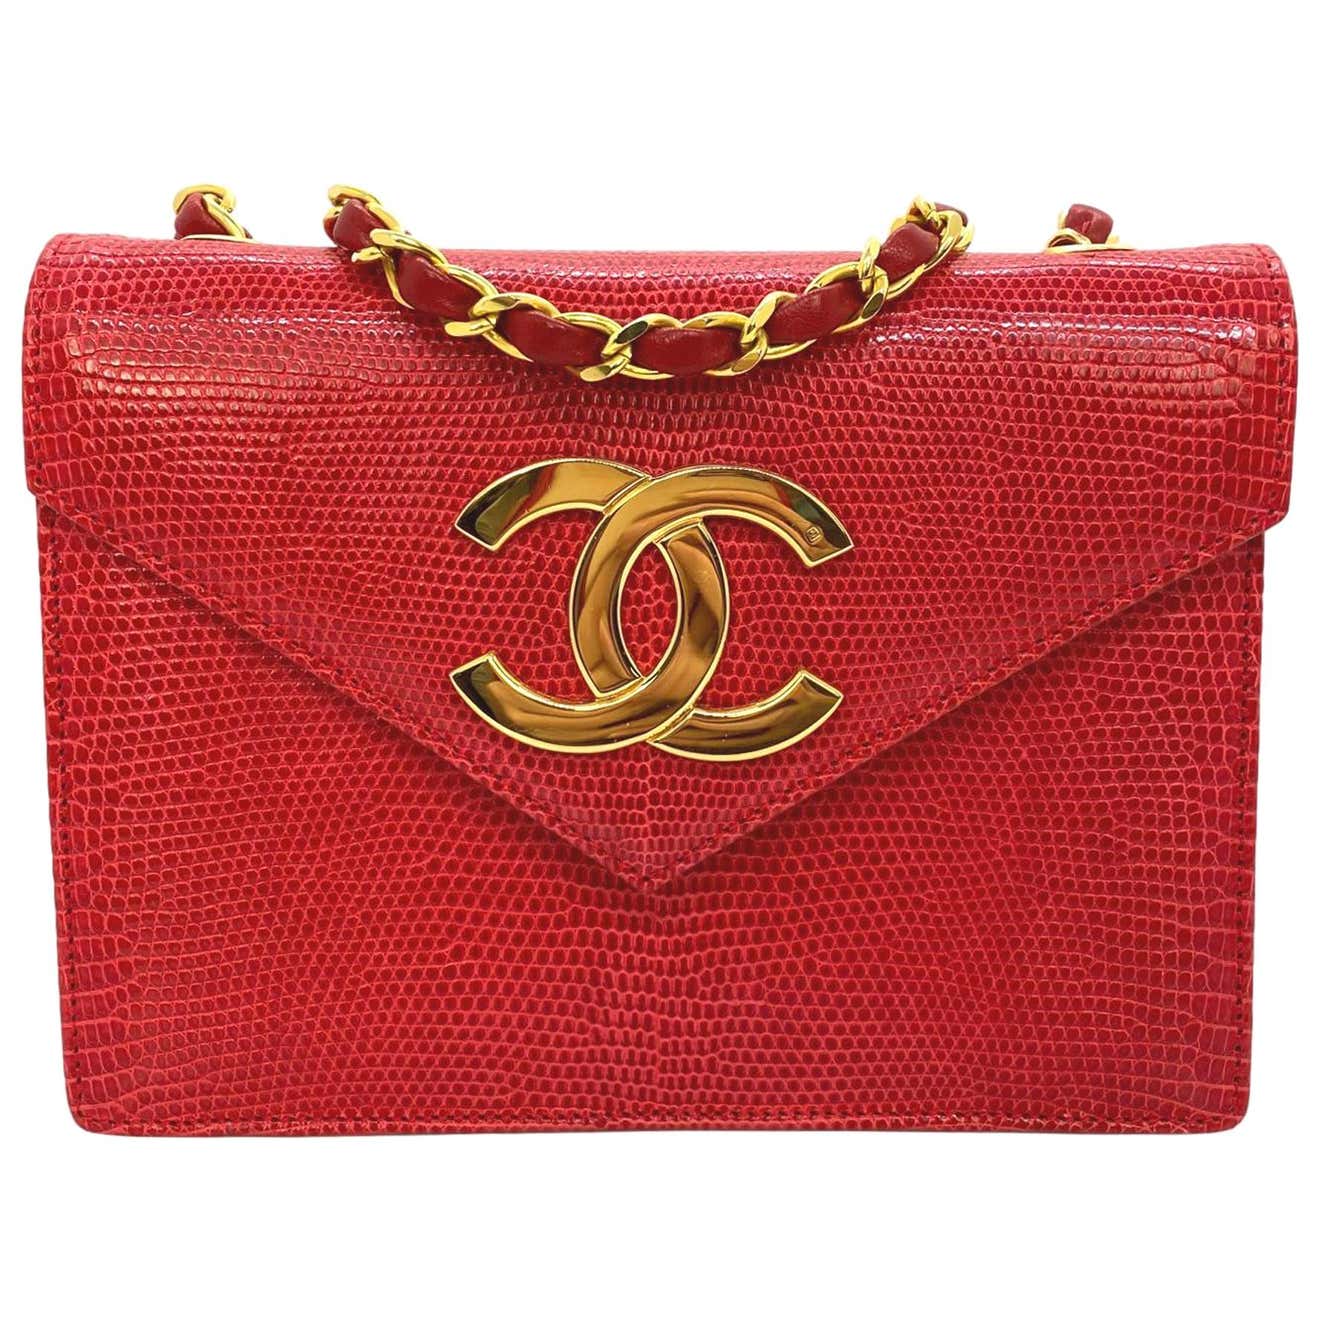 Chanel Vintage Red Lizard Envelope Cross Body Flap Bag with Gold ...